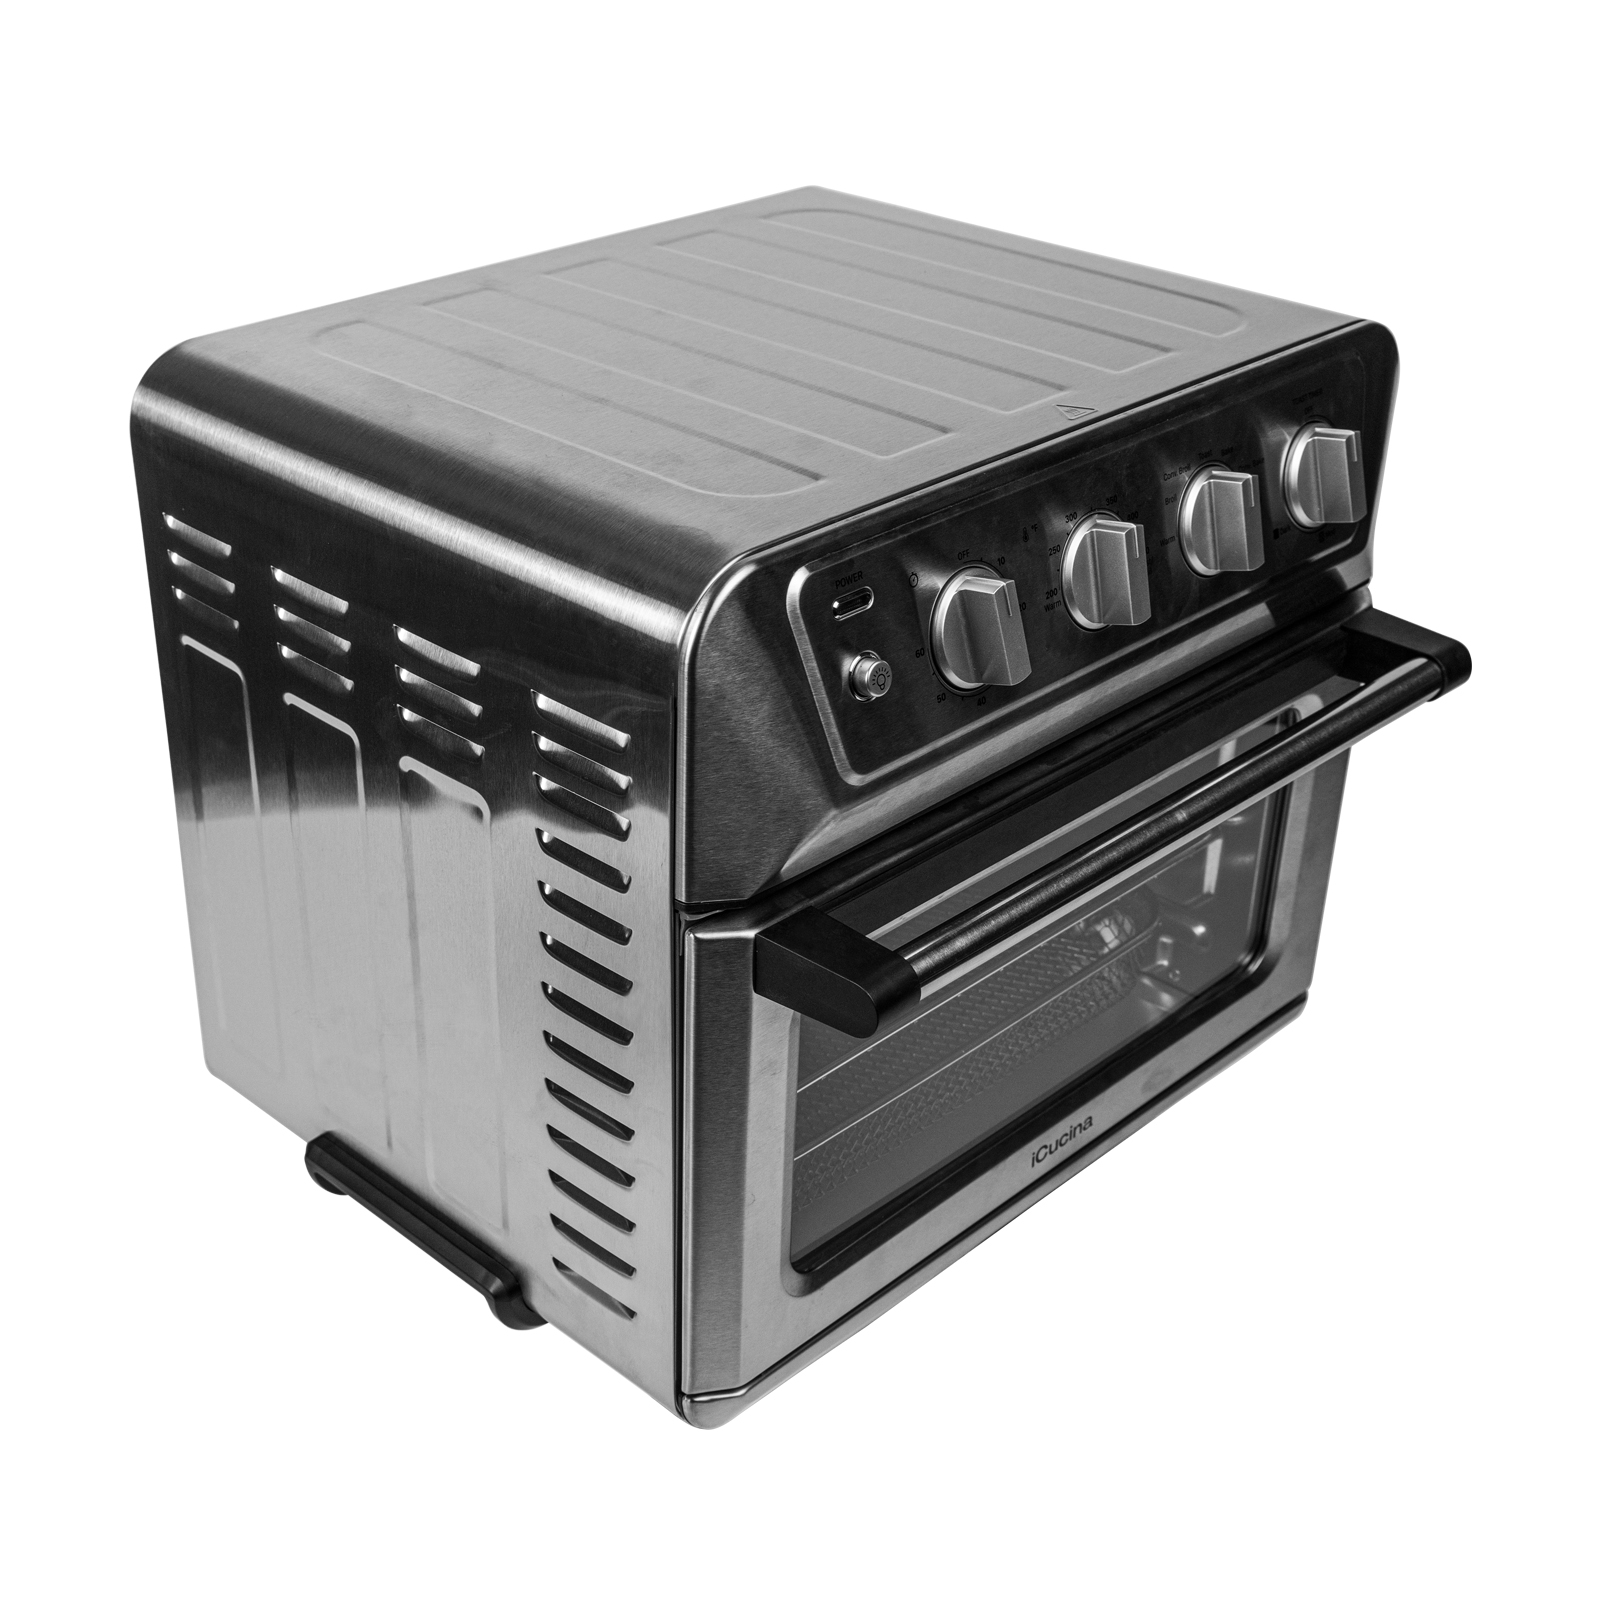 iCucina Toaster Oven Air Fryer Combo, Countertop Oven with 4 Slice